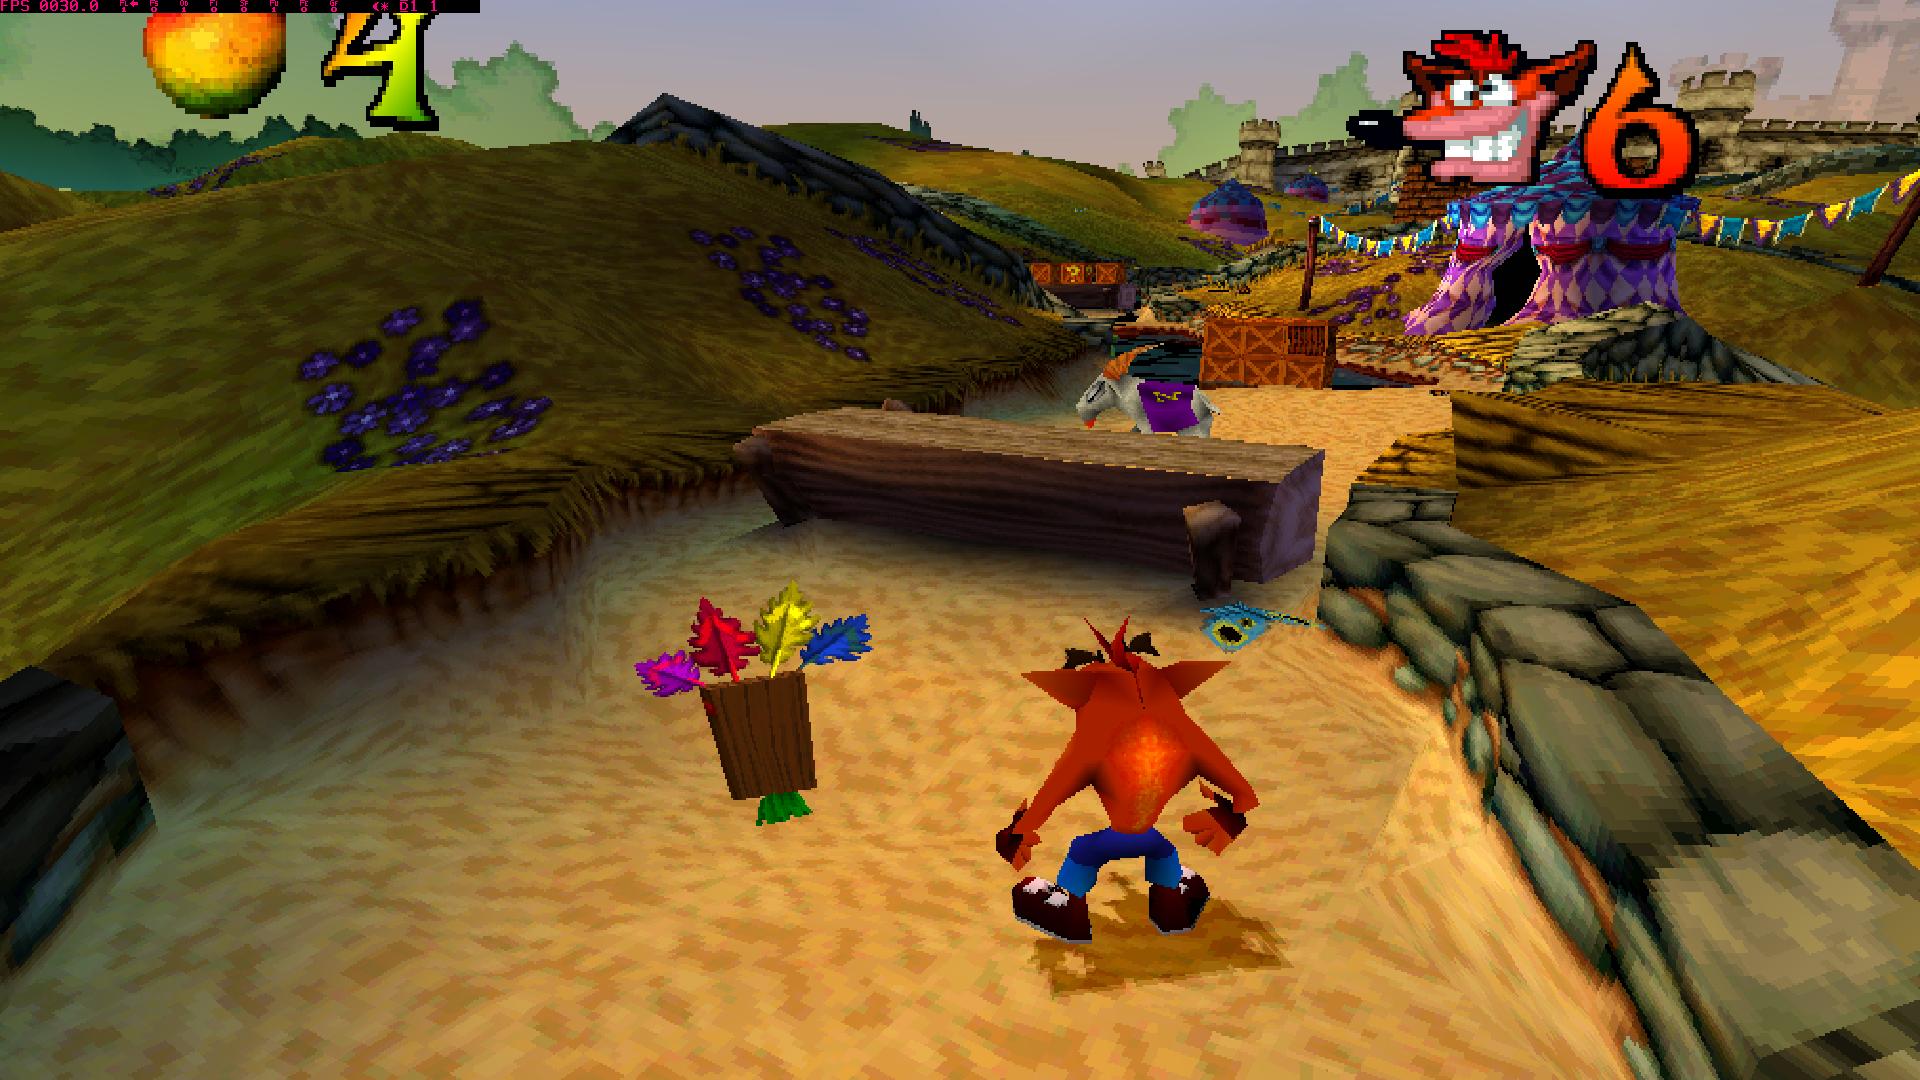 Crash Bandicoot Rumored to Be In “Skylanders” - But There Are Sony Rumors As Well...